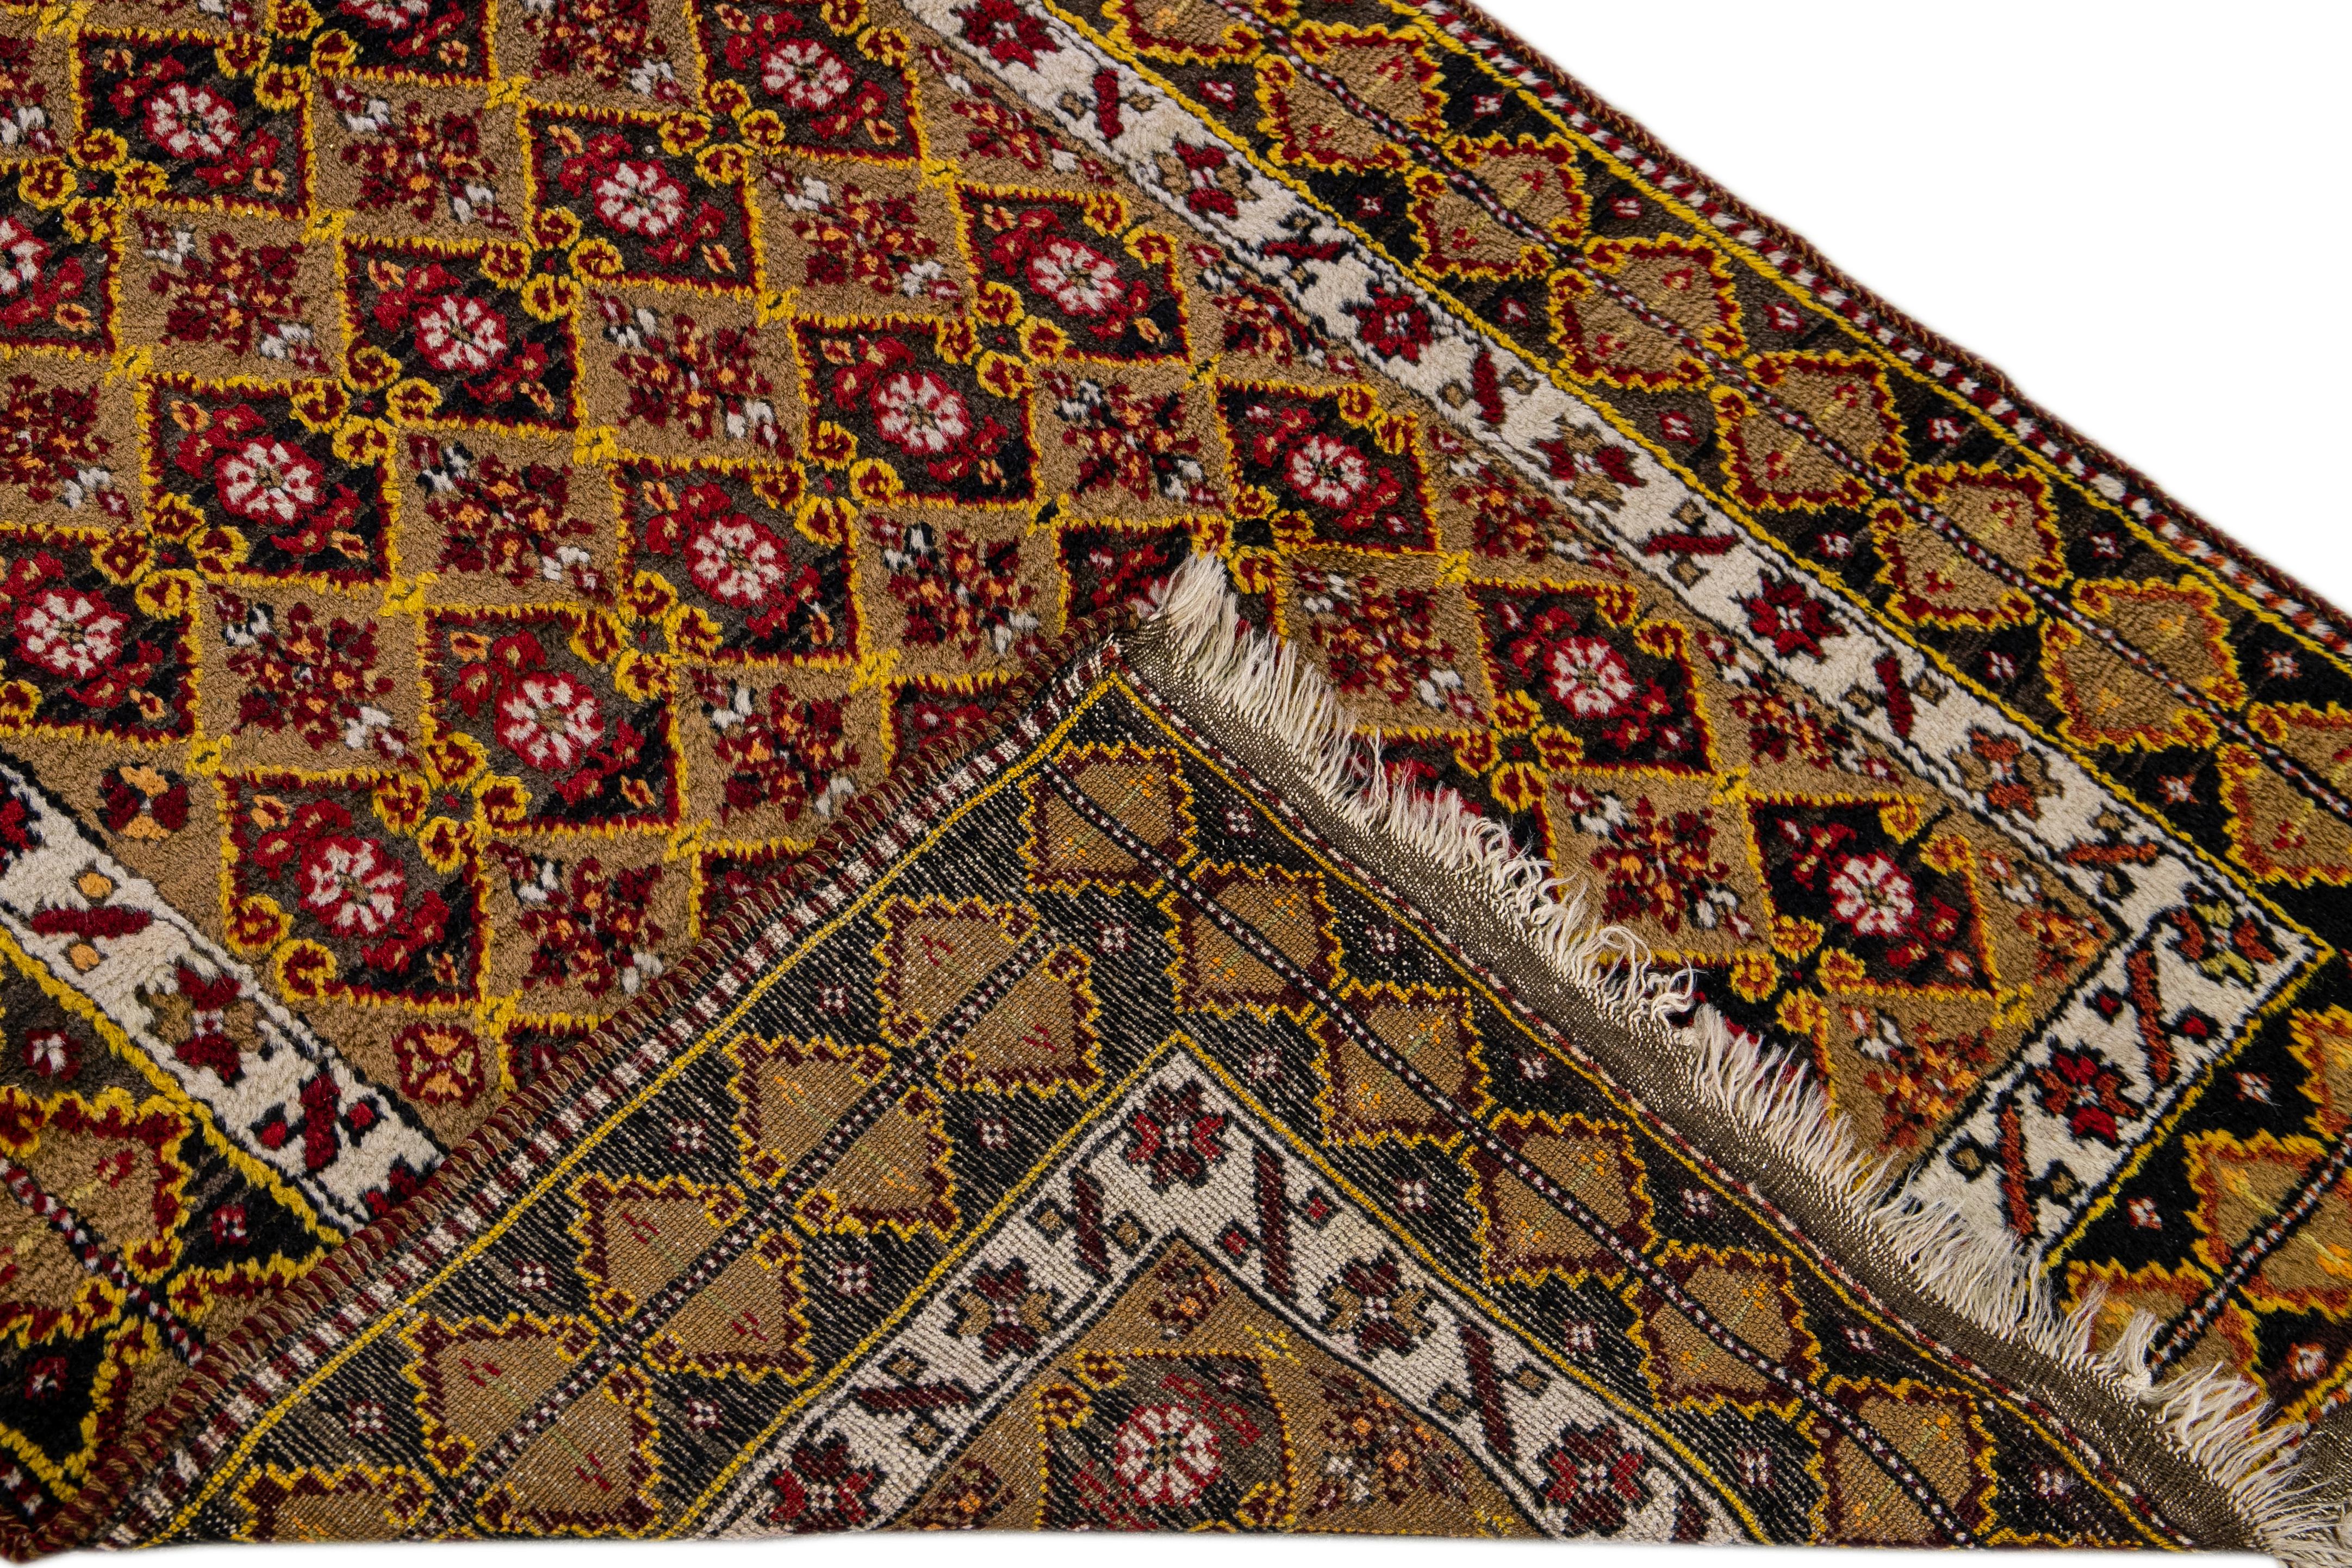 Antique Turkish hand-knotted wool runner with the brown sienna field. This piece has red, yellow, and brown accents in an all-over geometric floral design.
 
This rug measures: 3' x 10'.